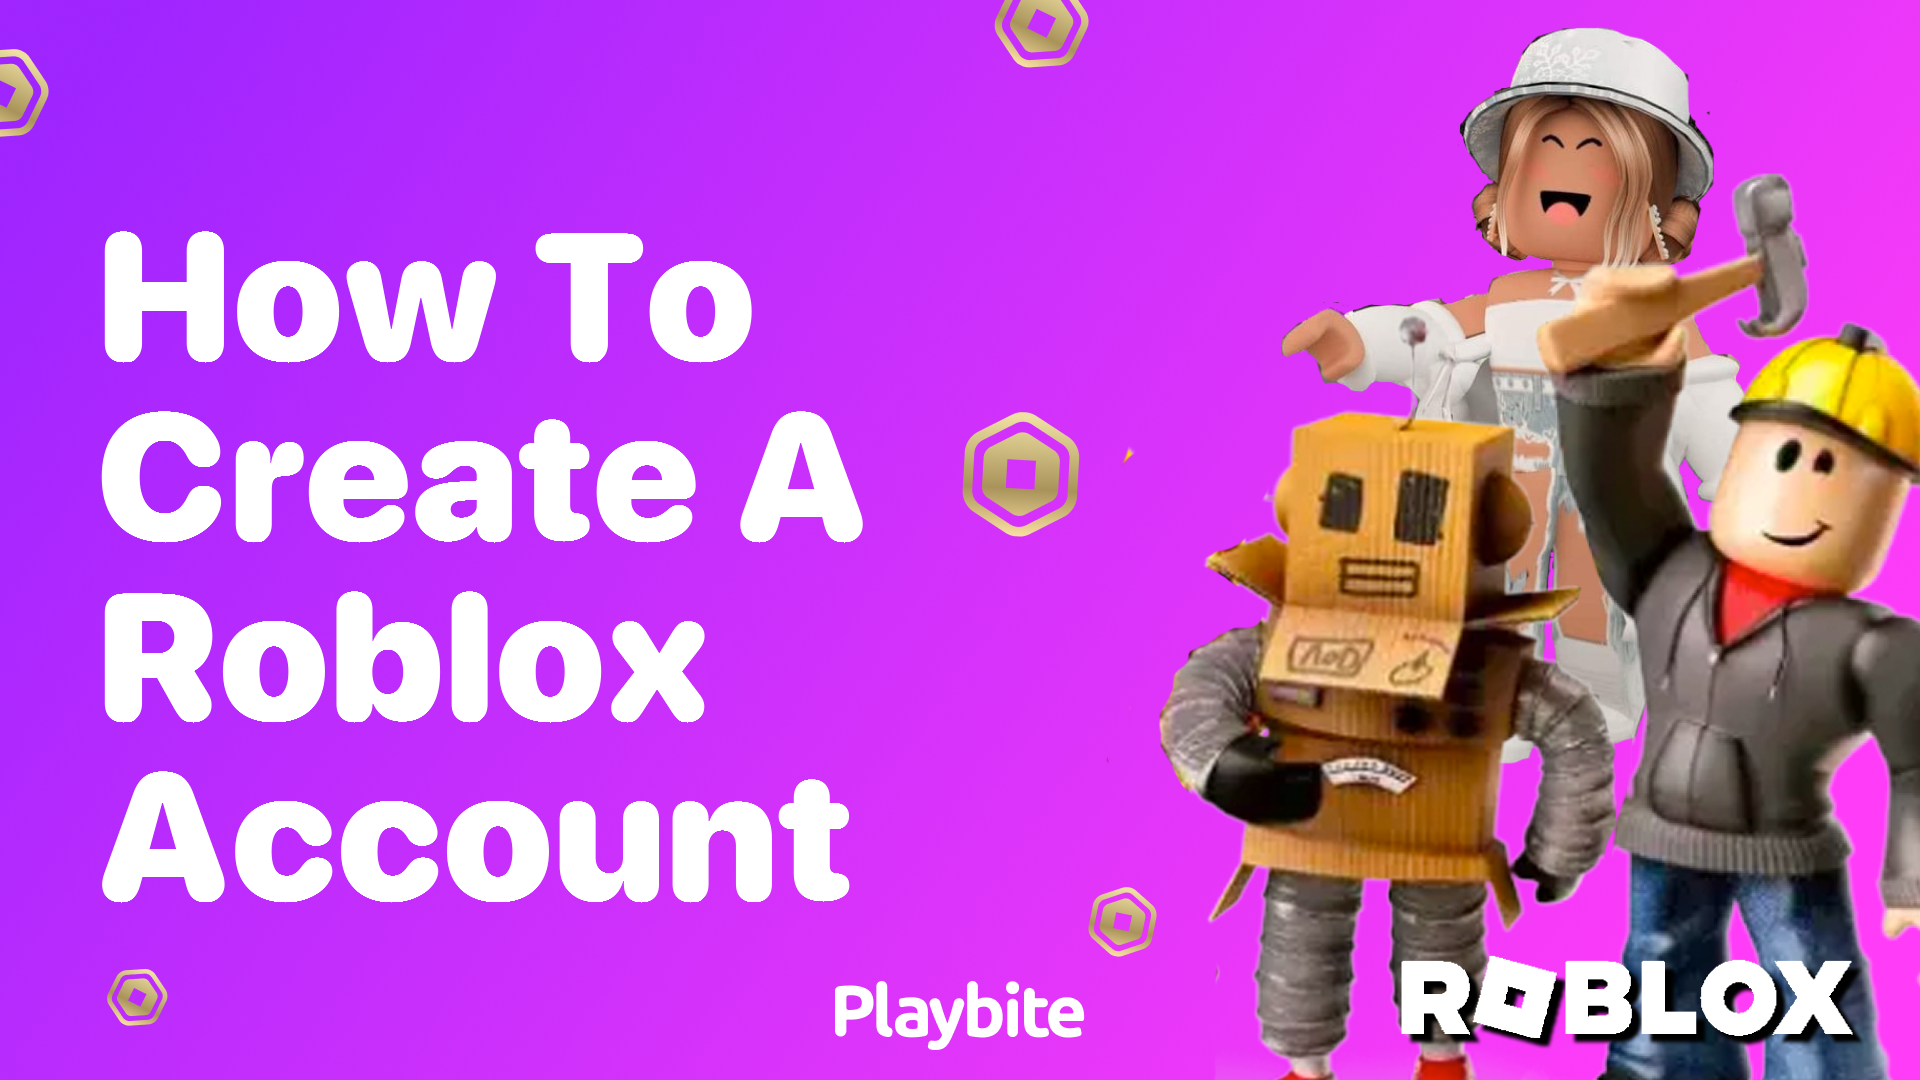 How to Create a Roblox Account: A Simple Guide